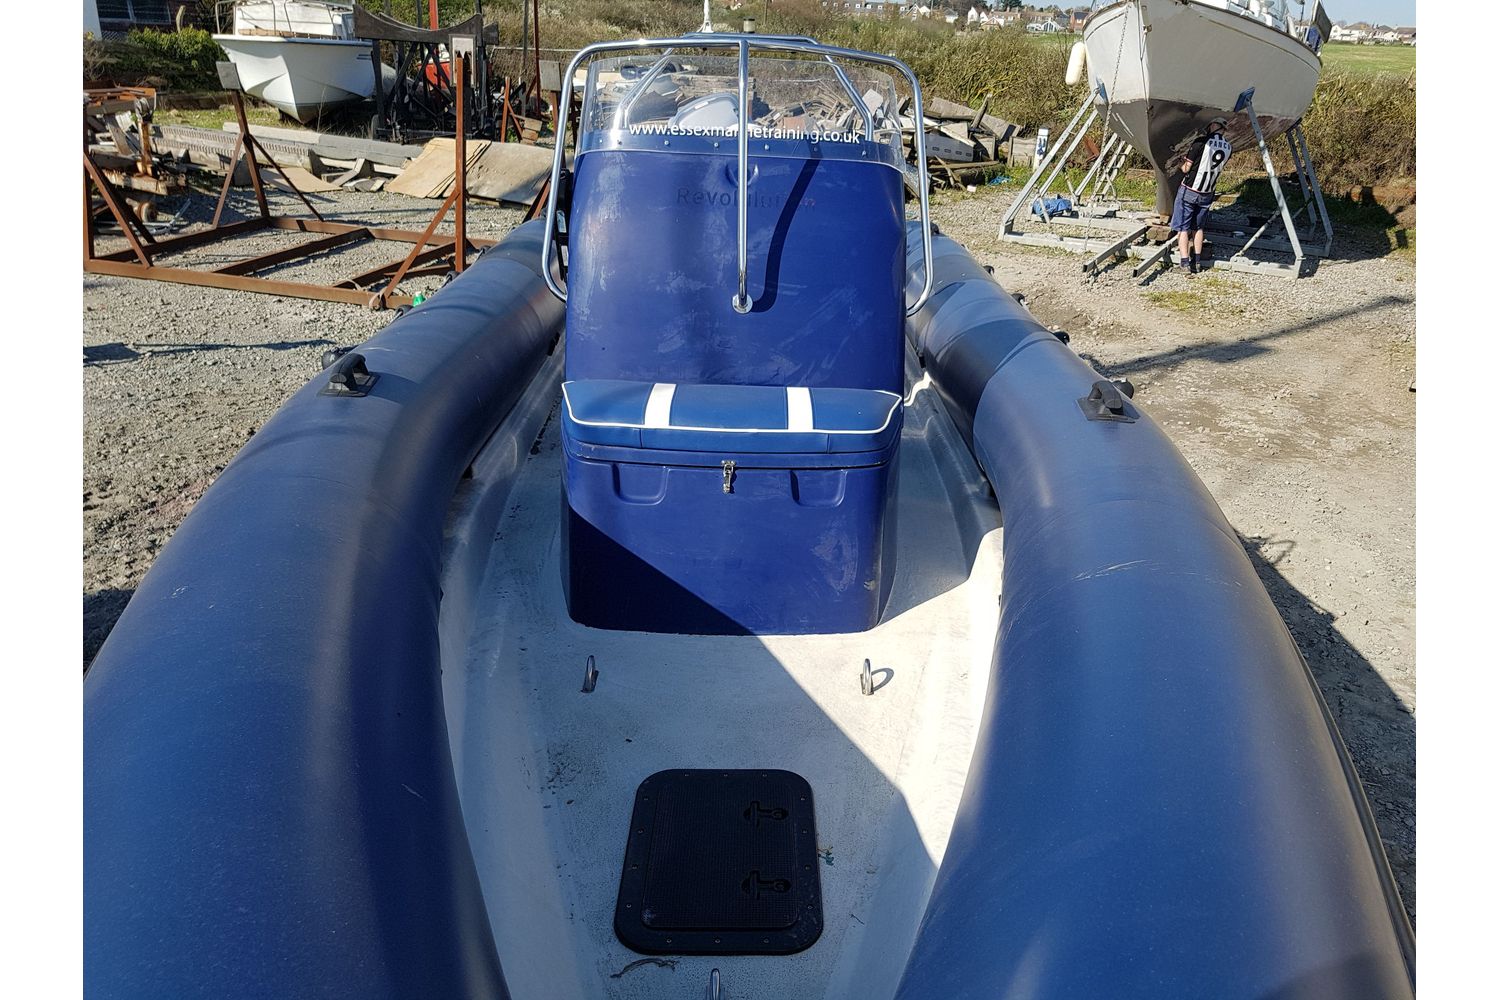 used boats for sales essex